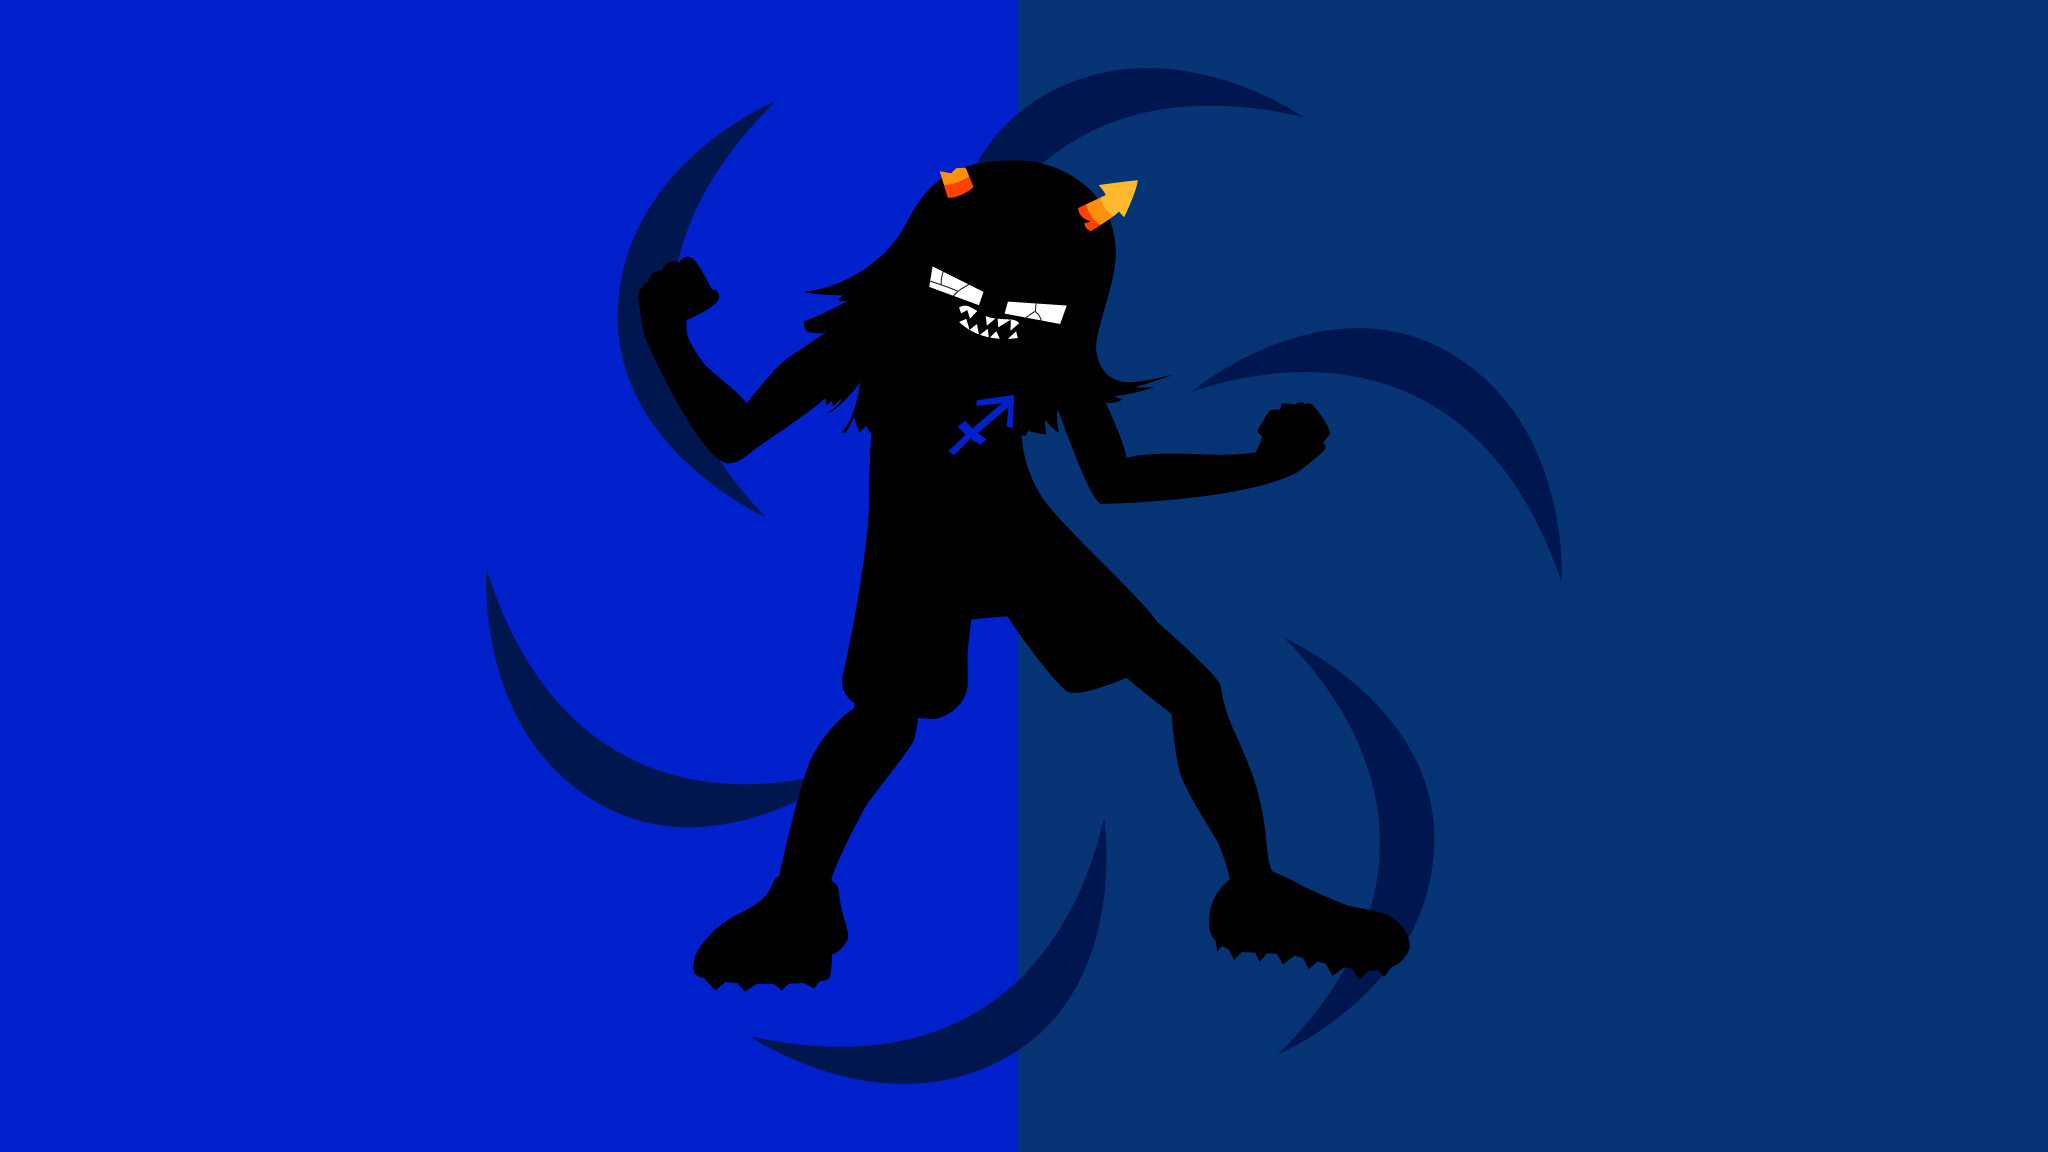 Equius Wallpaper Vector by Colcoction